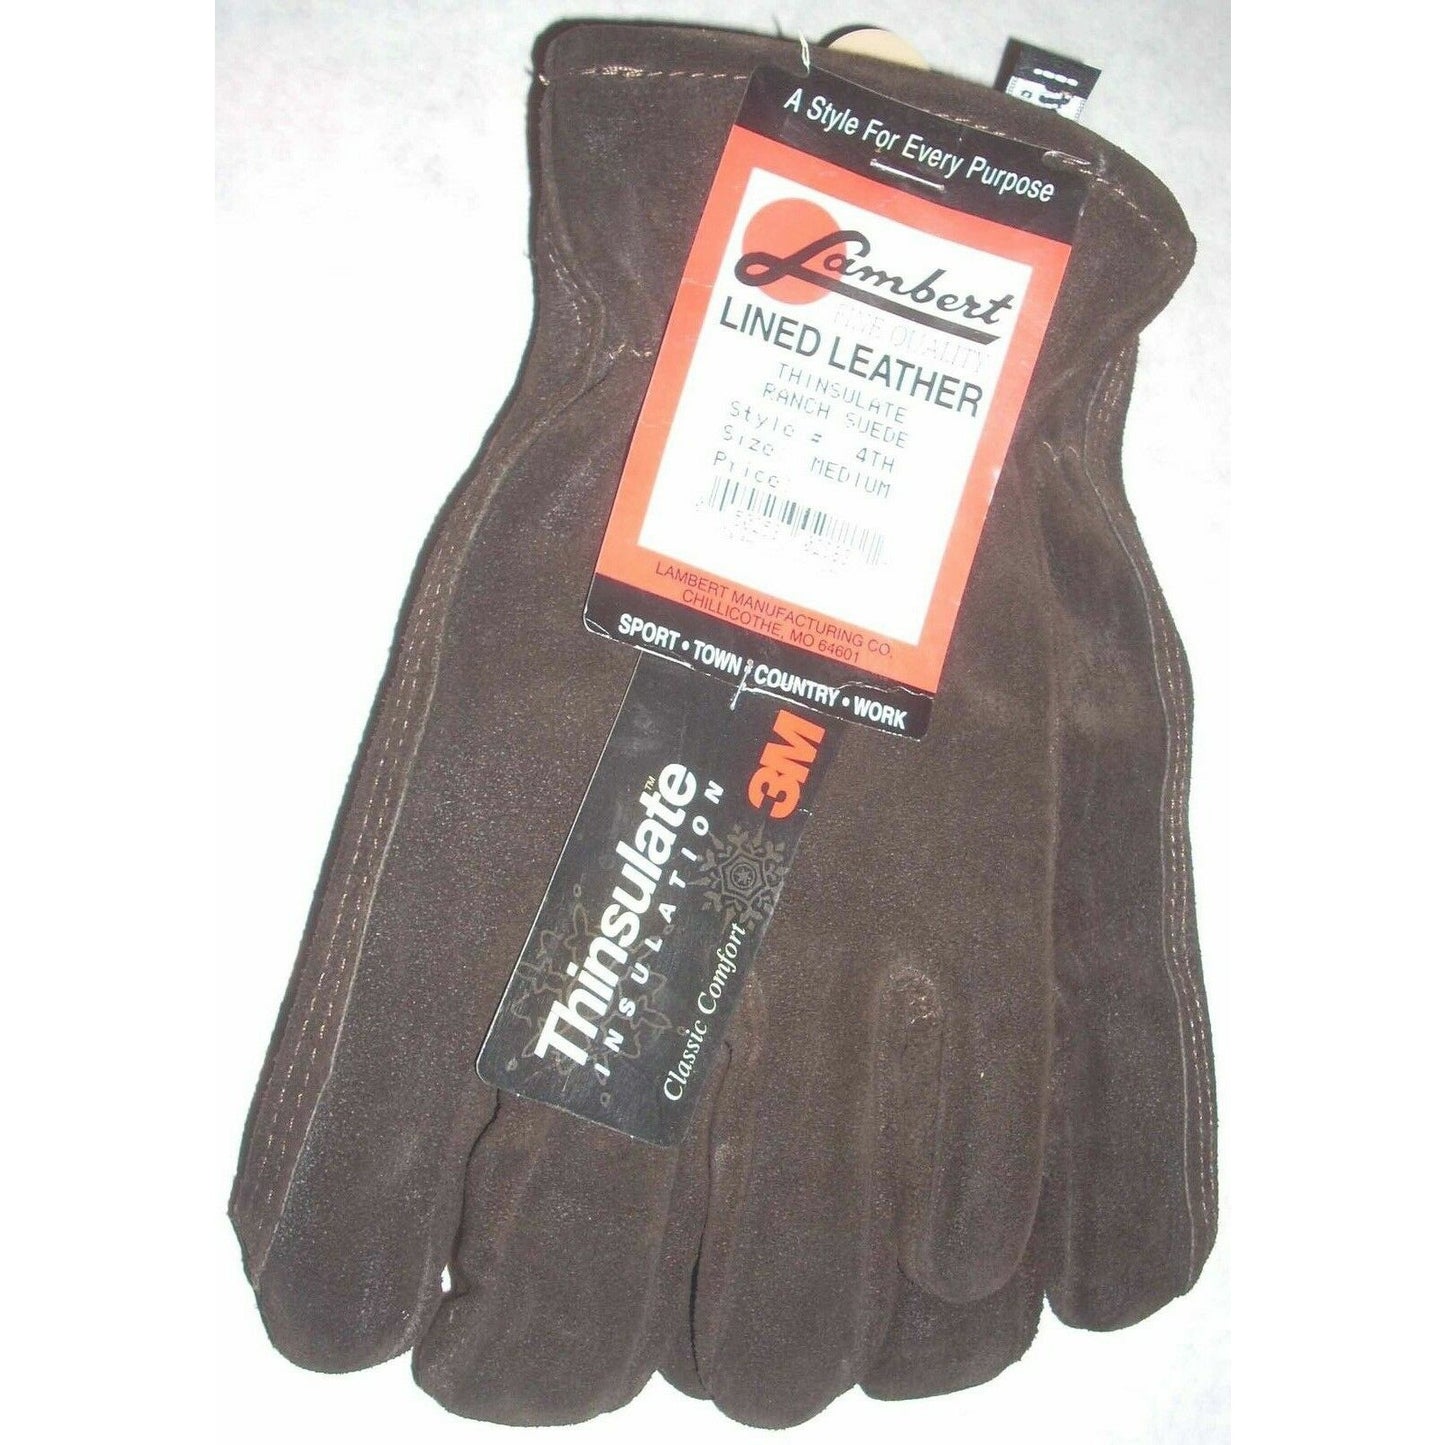 Lambert 4TH Dark Brown Suede Leather Gloves Thinsulate Lined Medium